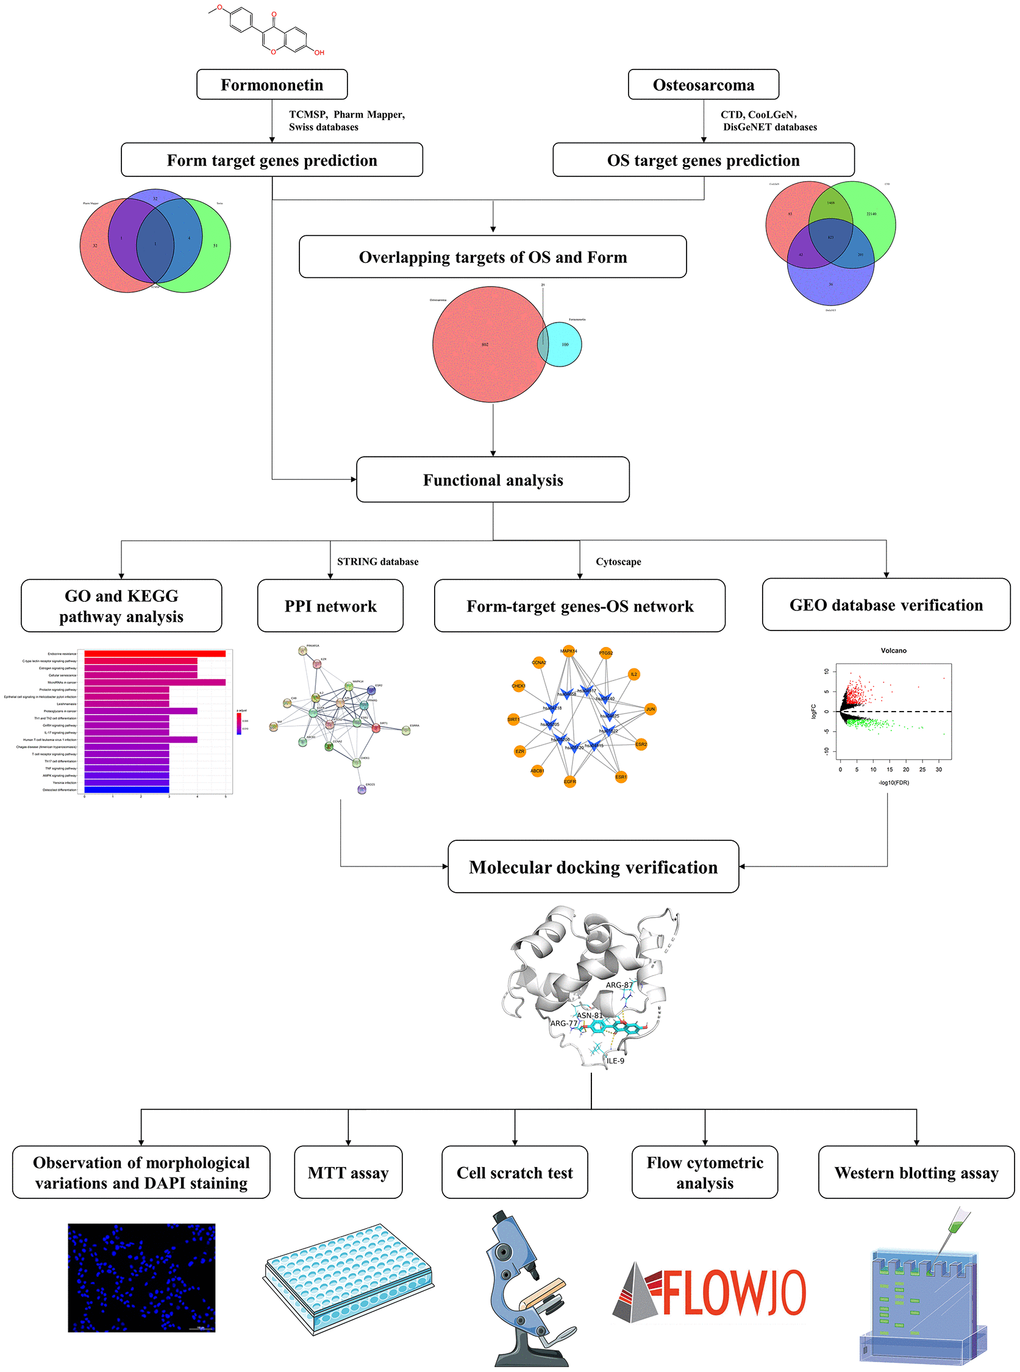 A workflow of network pharmacology analysis.